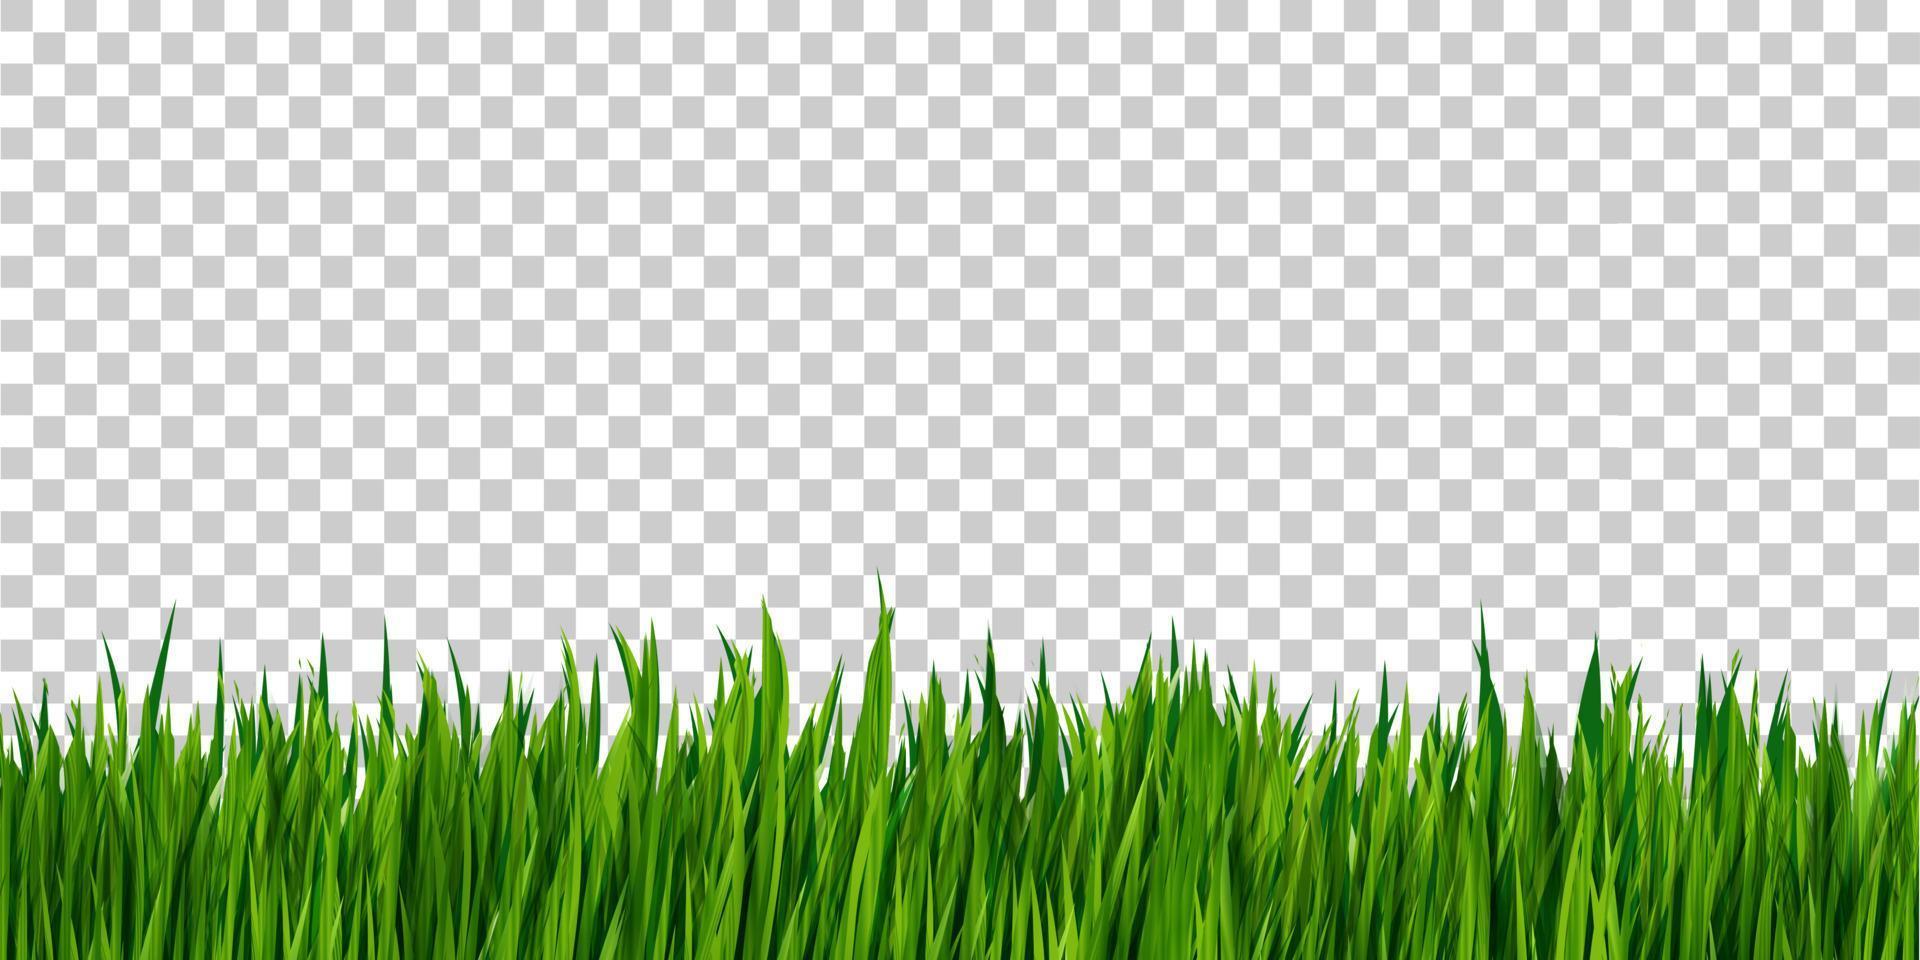 Green grass border isolated on transparent background, grass field vector